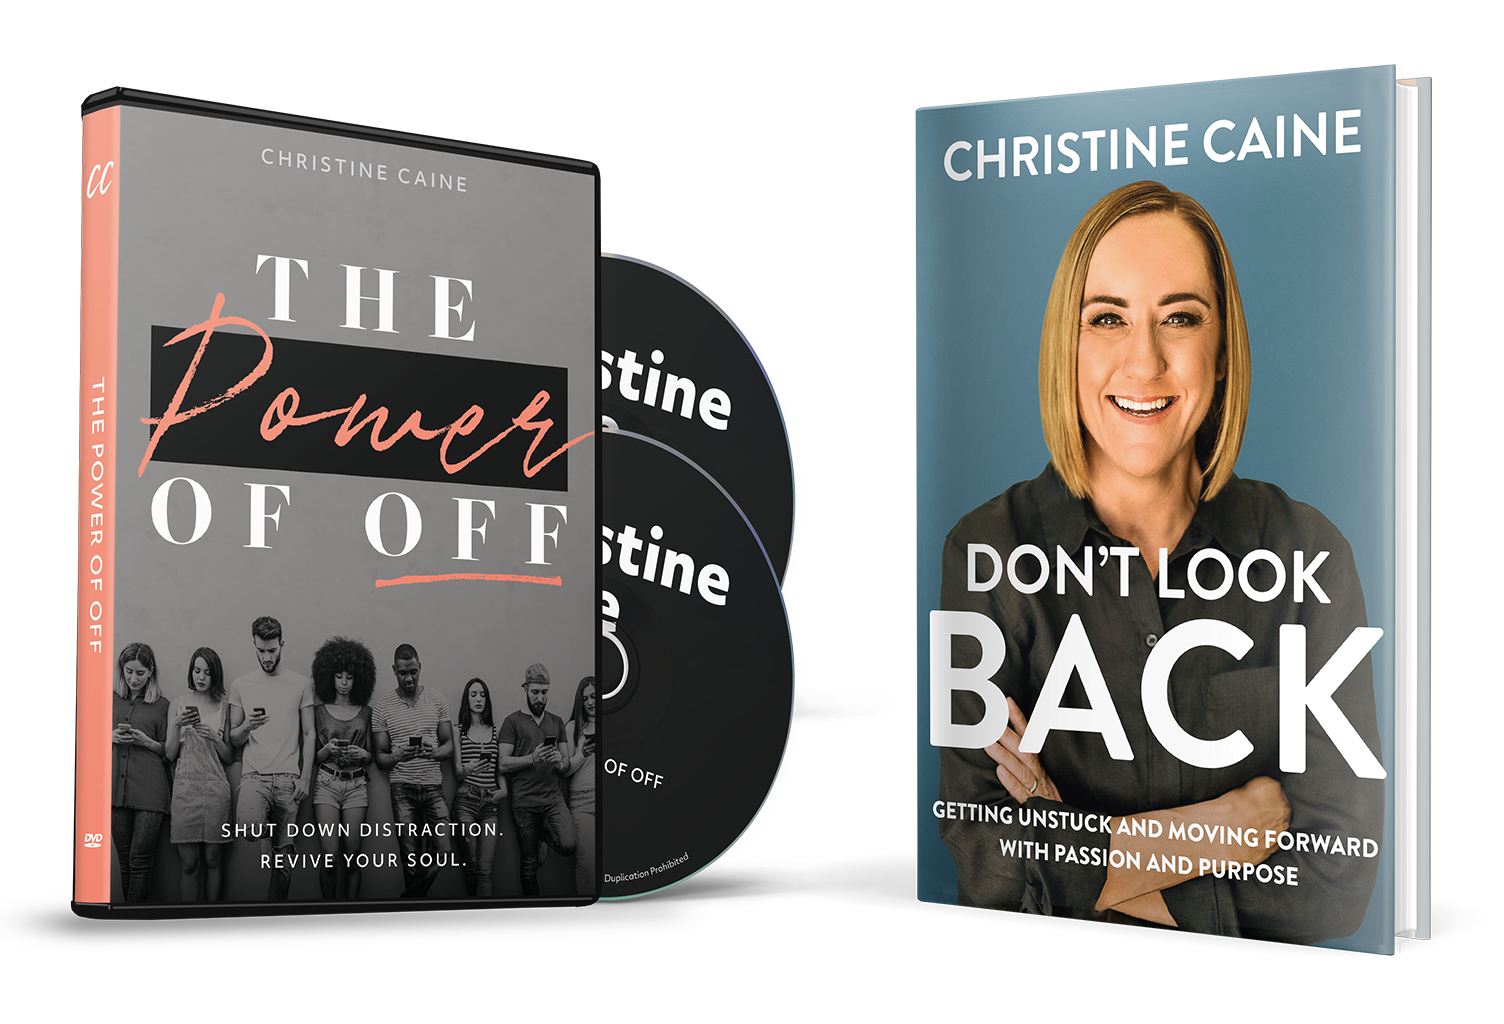 The Power of Off & Don't Look Back by Christine Caine from TBN